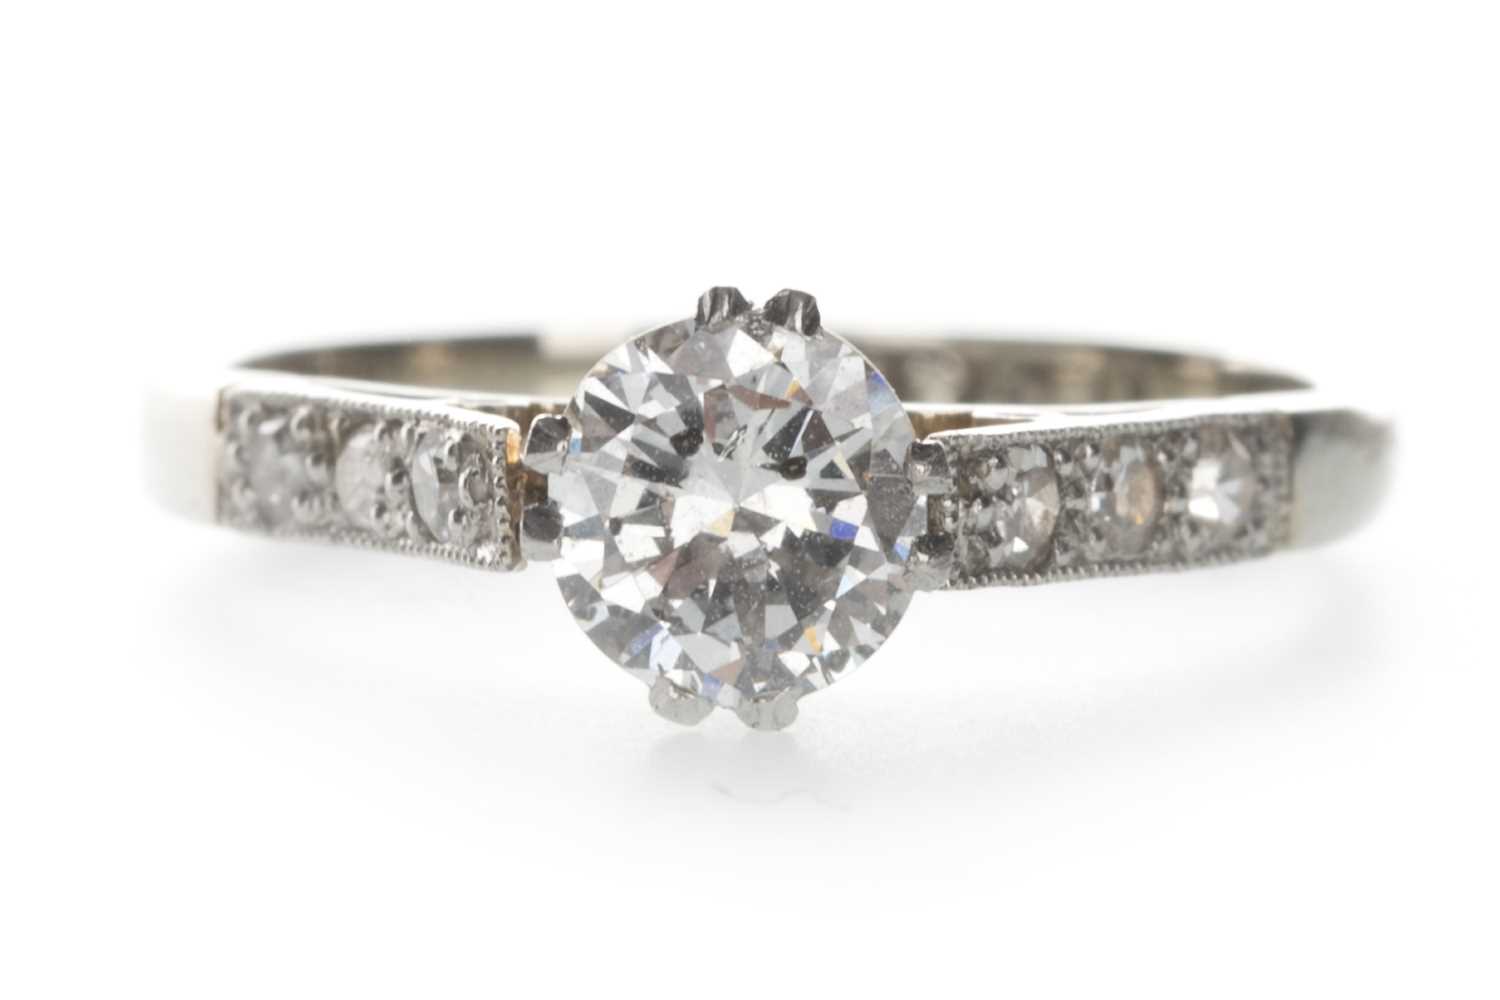 Lot 1307 - A DIAMOND SOLITAIRE RING